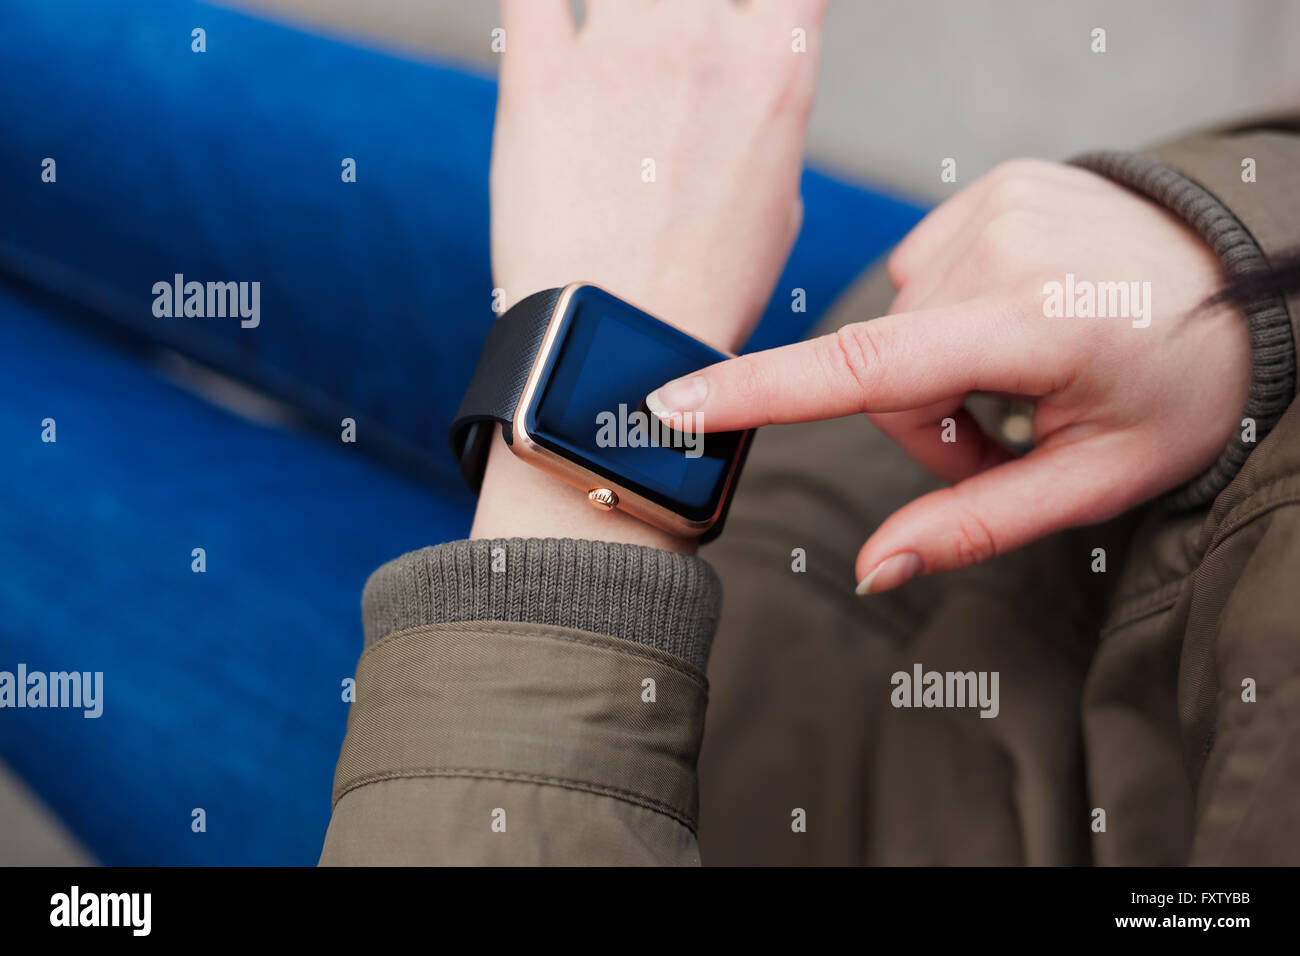 Hands of a woman using her smart watch. This new gadget lets you always stay connected to internet and social media networks from anywhere you want. Stock Photo